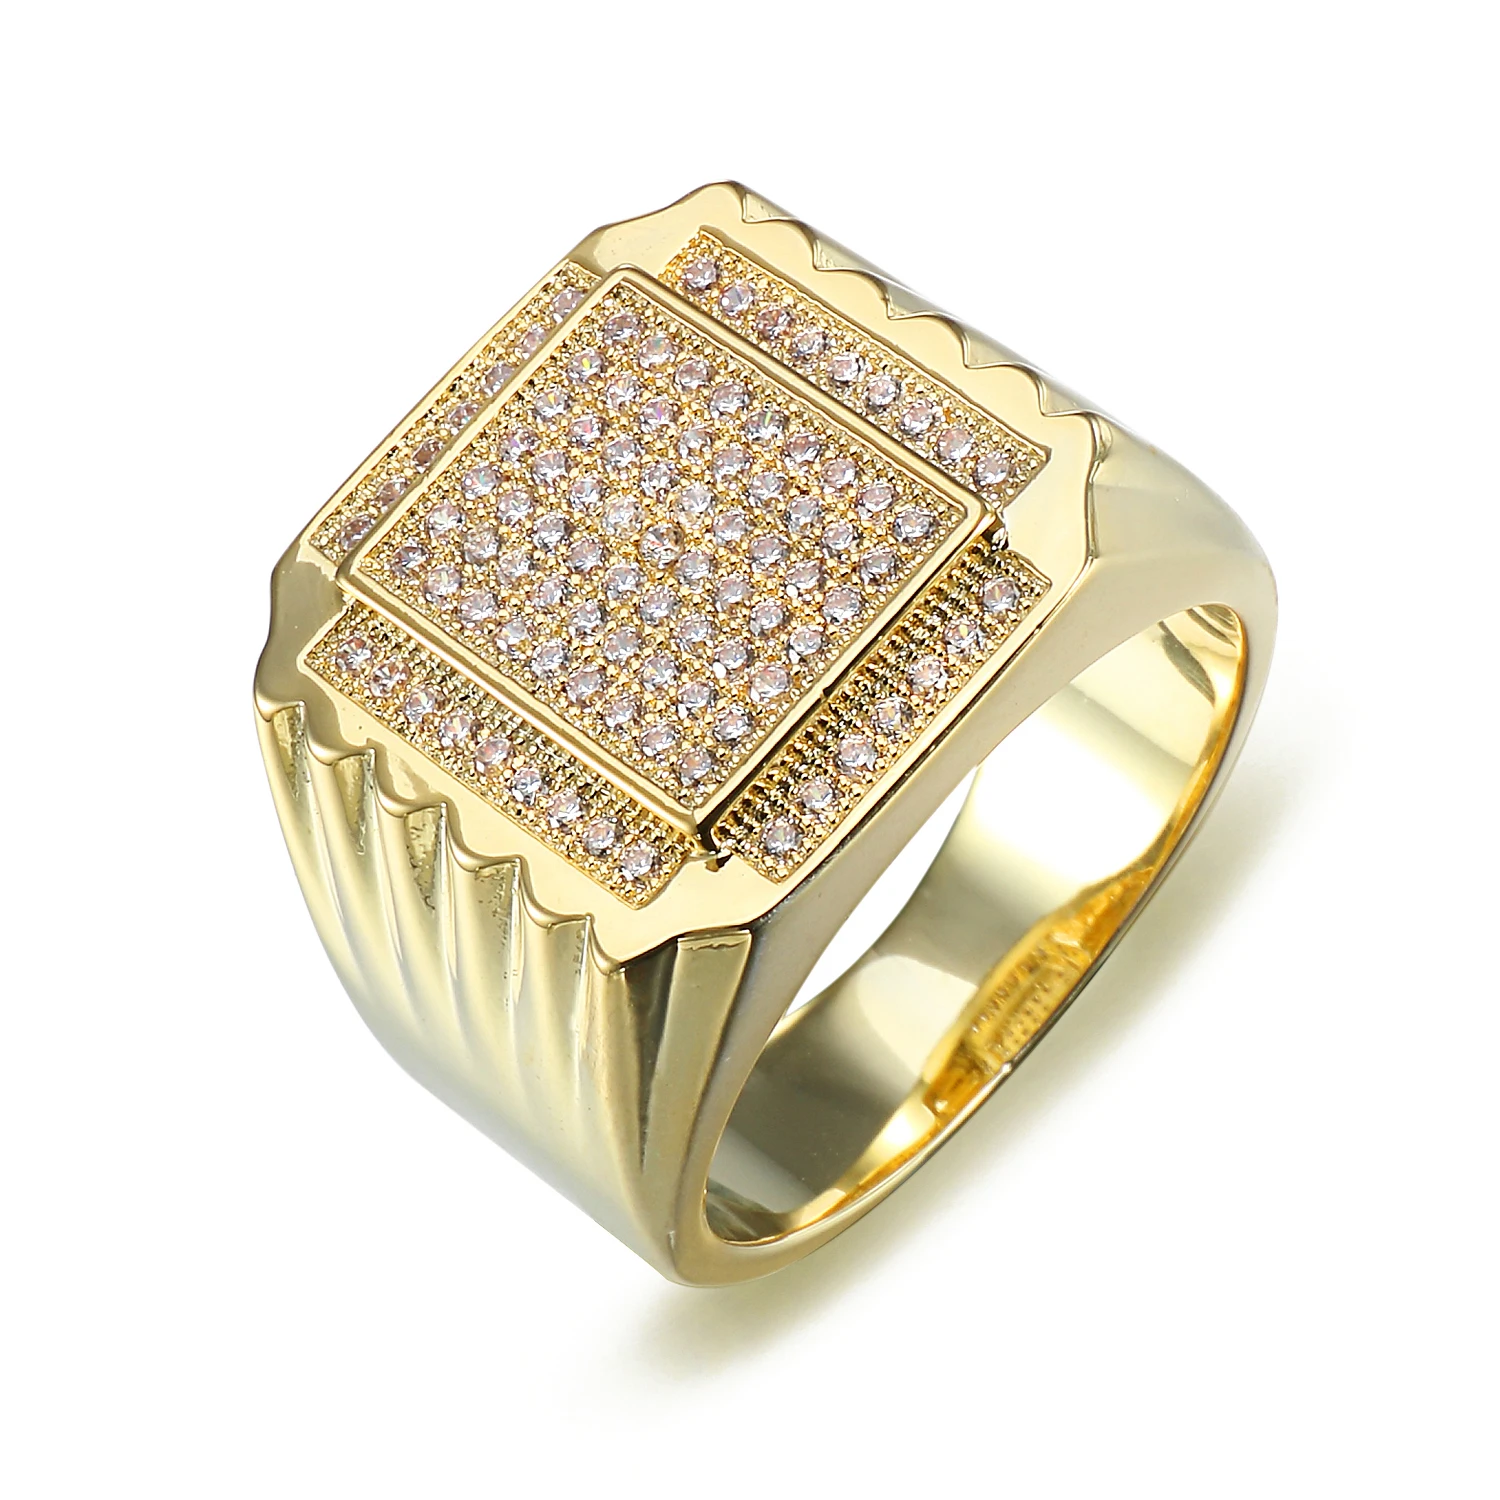 3.18 Cts White CZ Diamond Mens Square Hip Hop Ring in 14k Yellow Gold Finish 925 Silver